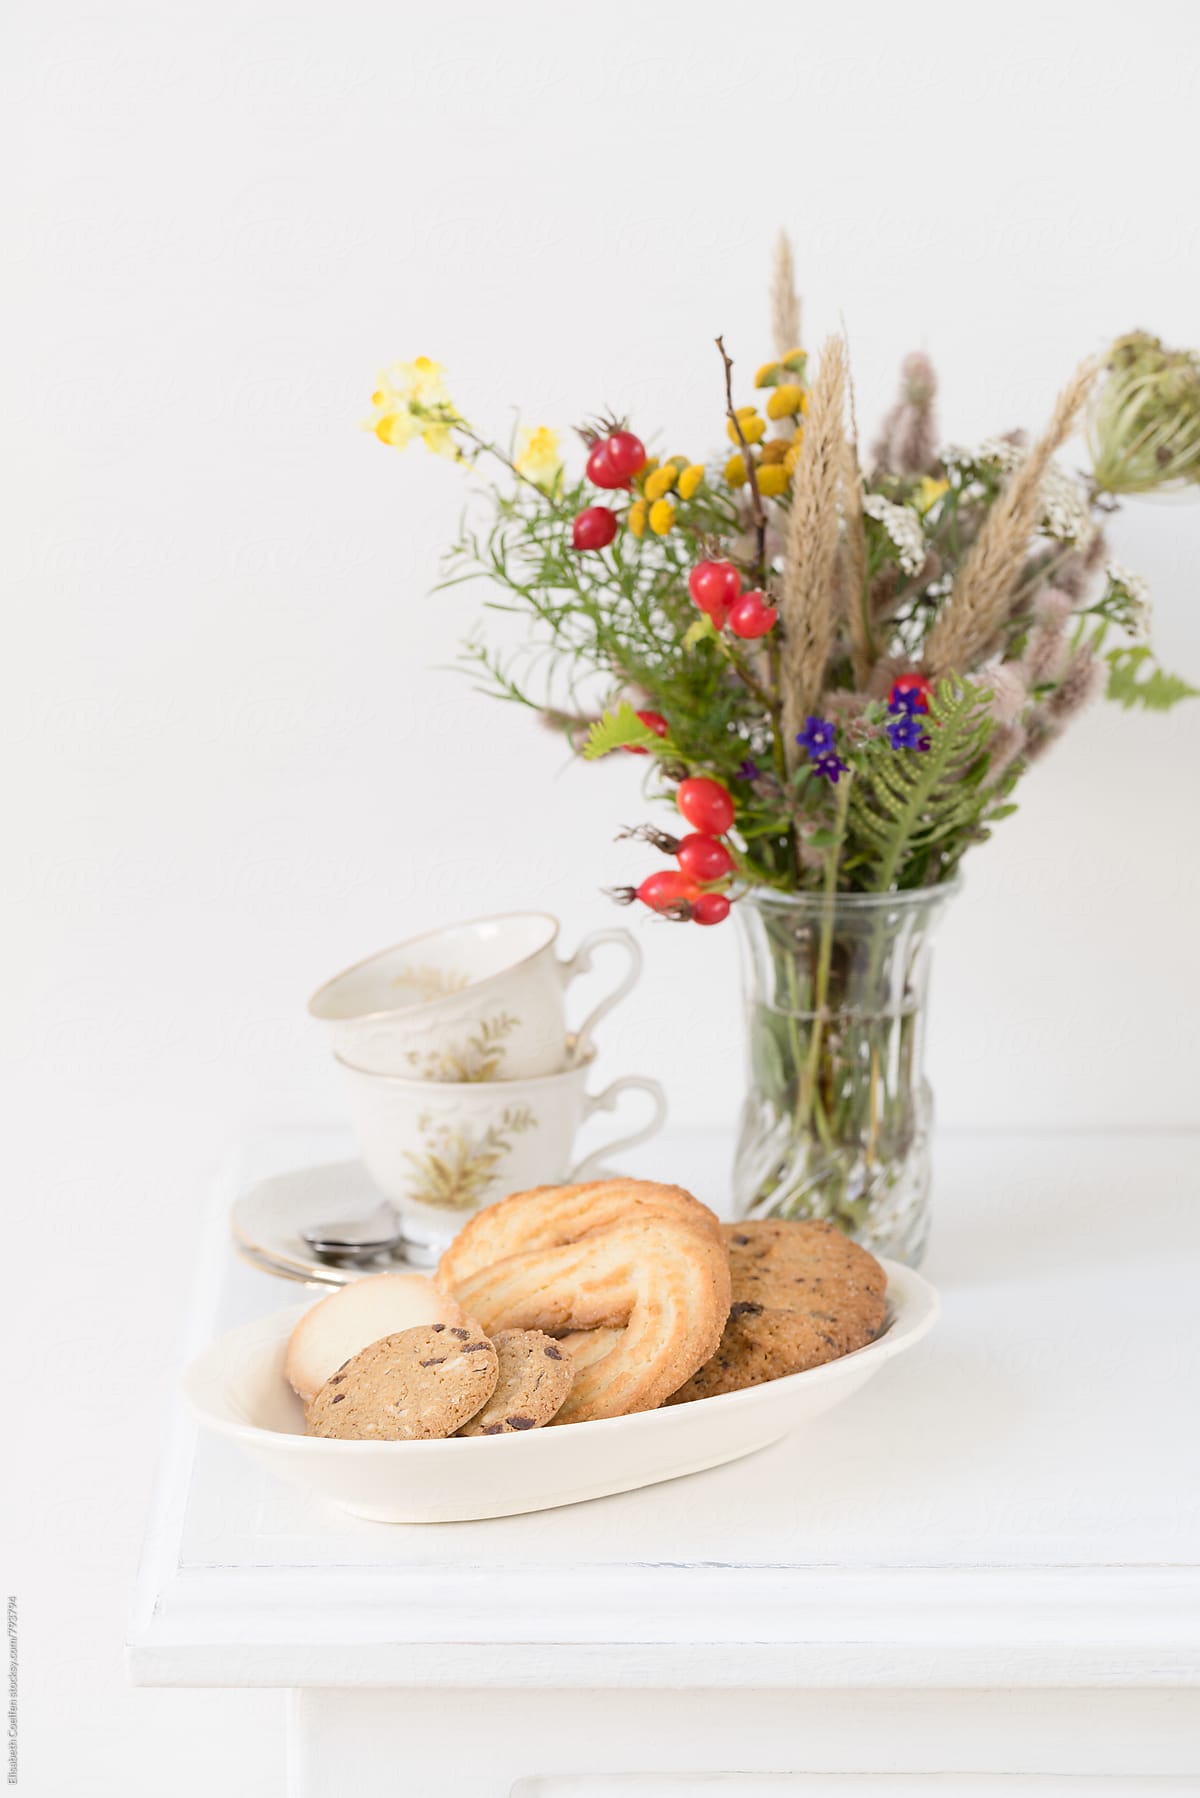 Tea time with cookies and a bouquet of wild flowers picked in the dunes